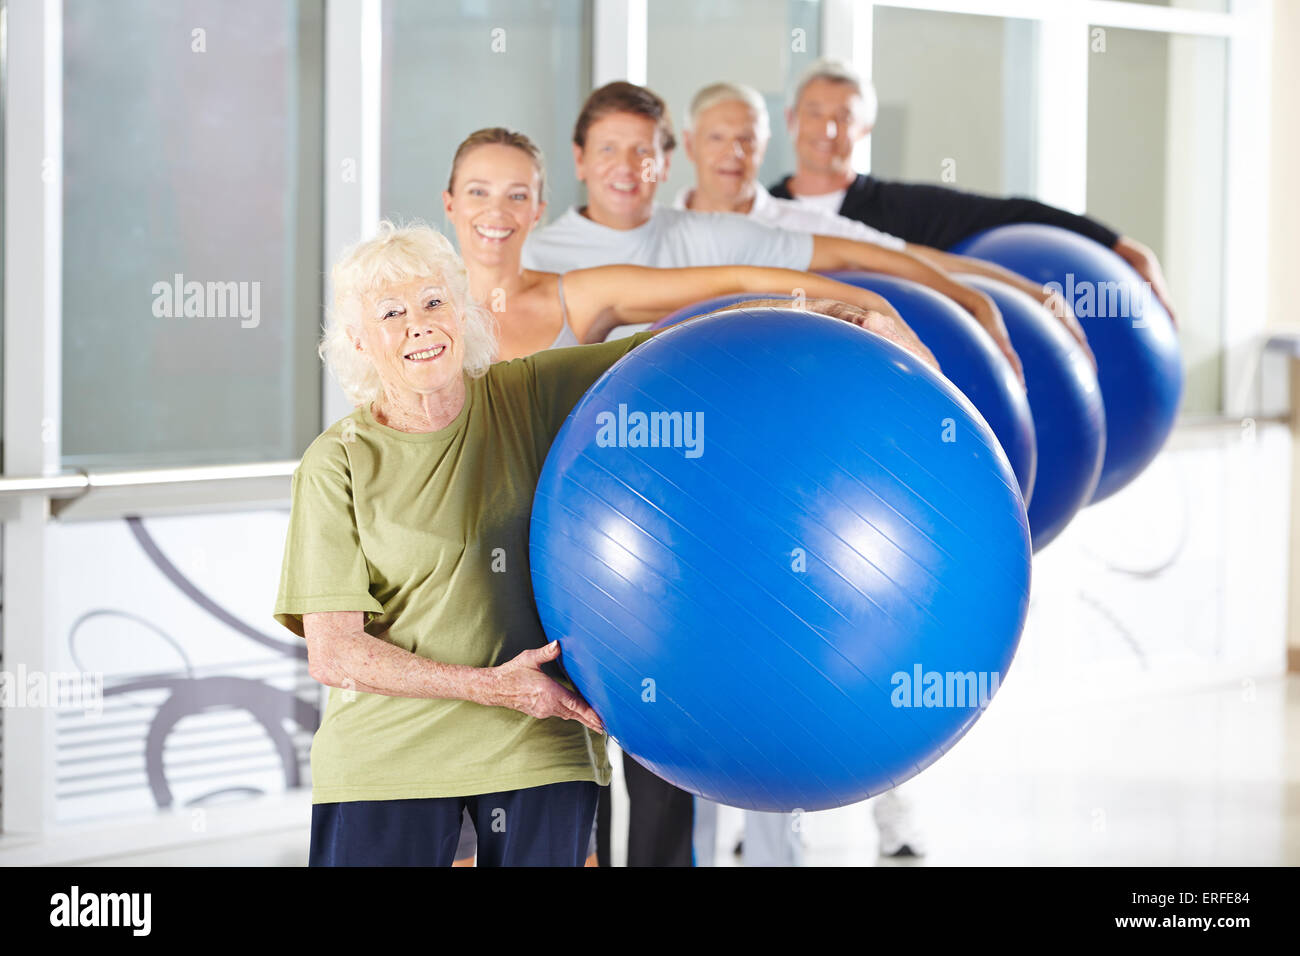 Group of senior people carrying gym balls in a fitness center Stock Photo